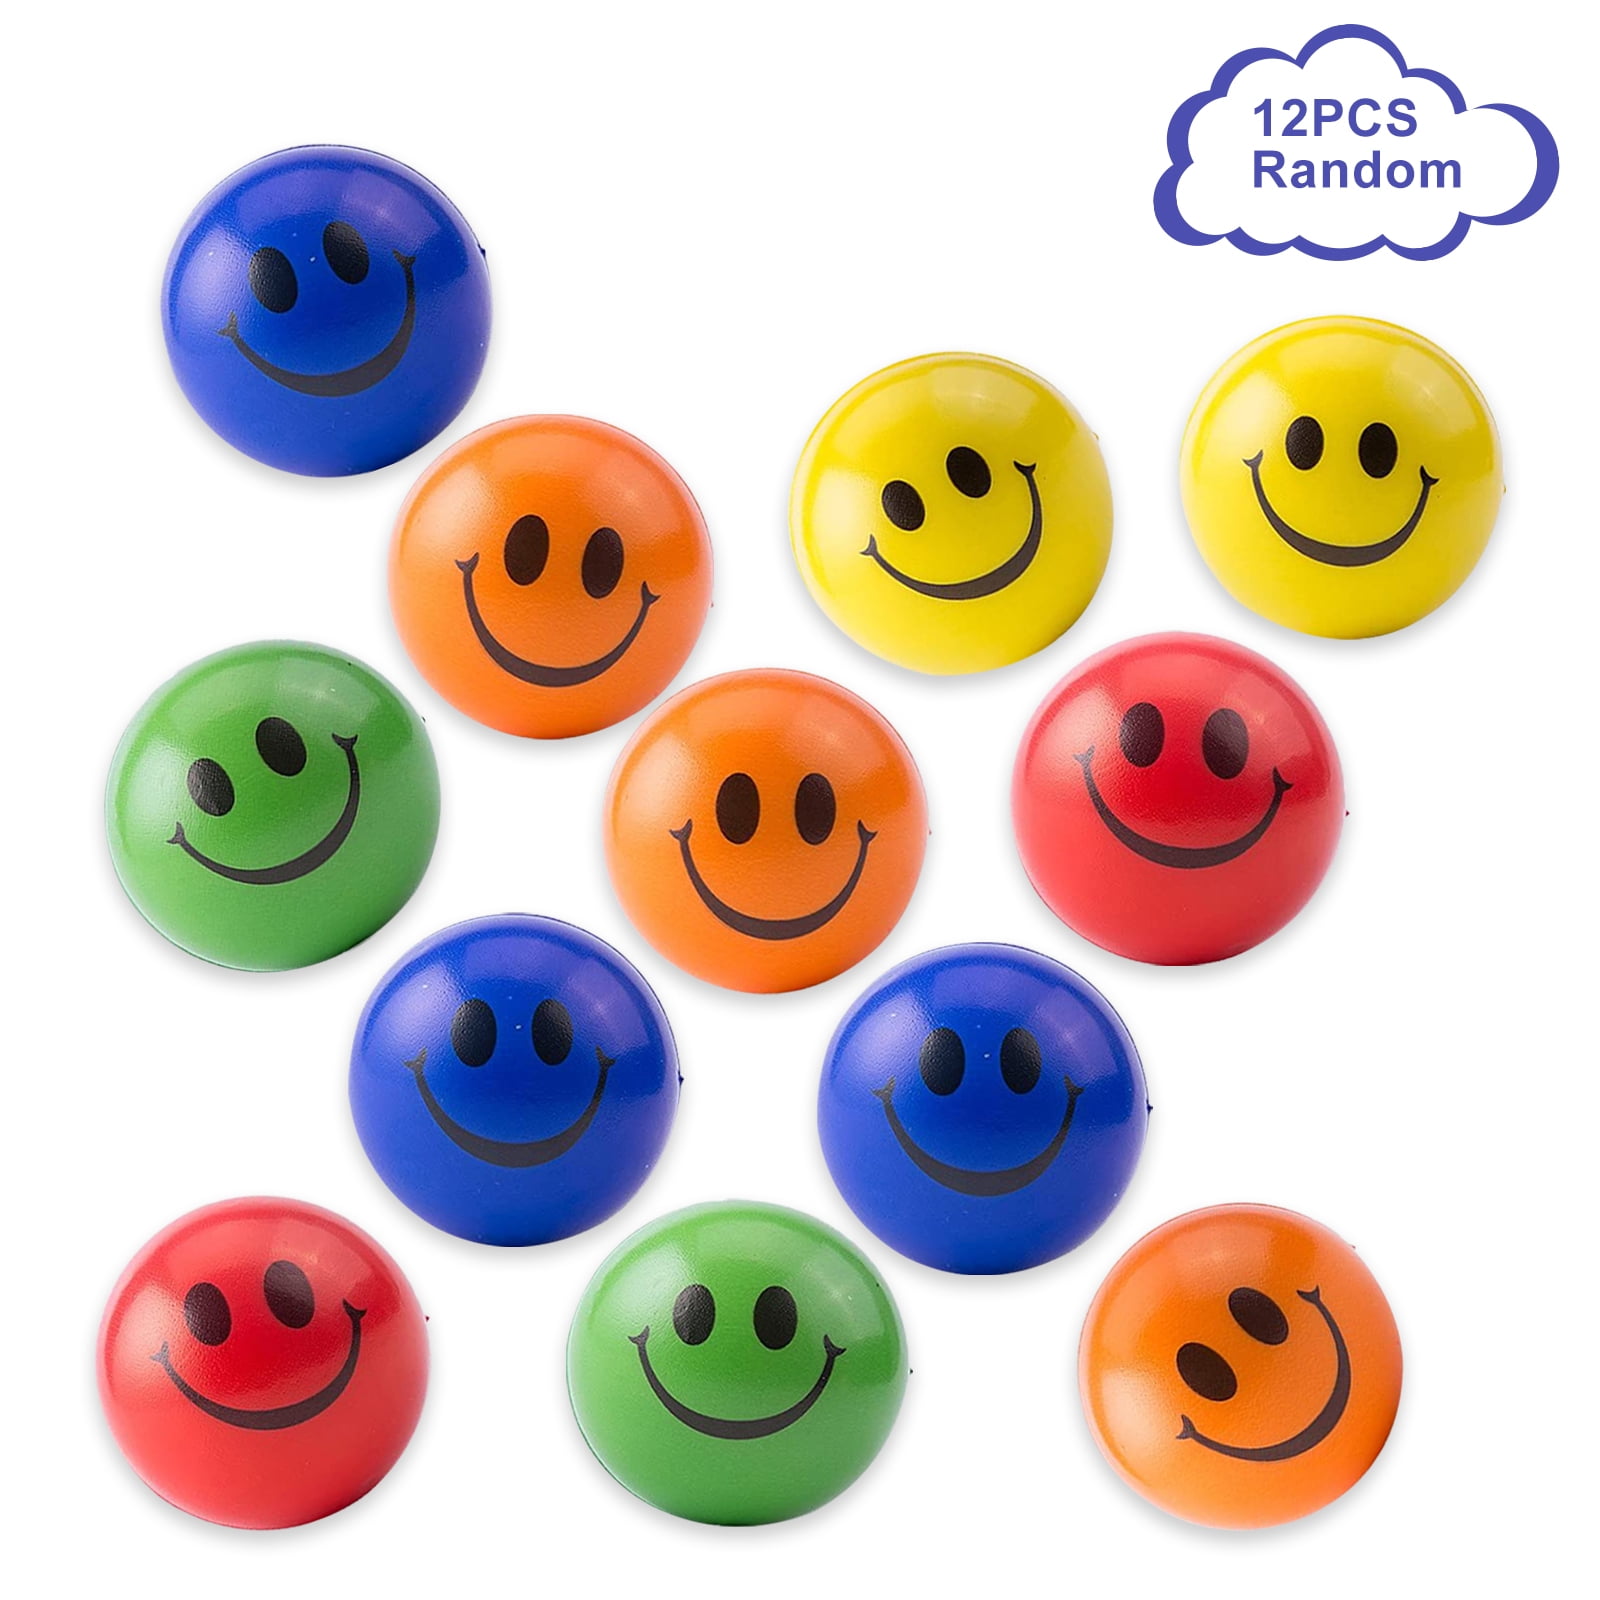 4 SMILE SMILEY FACE STRESS RELIEF BALLS 2" FOAM HAND THERAPY SQUEEZE TOY BALL 